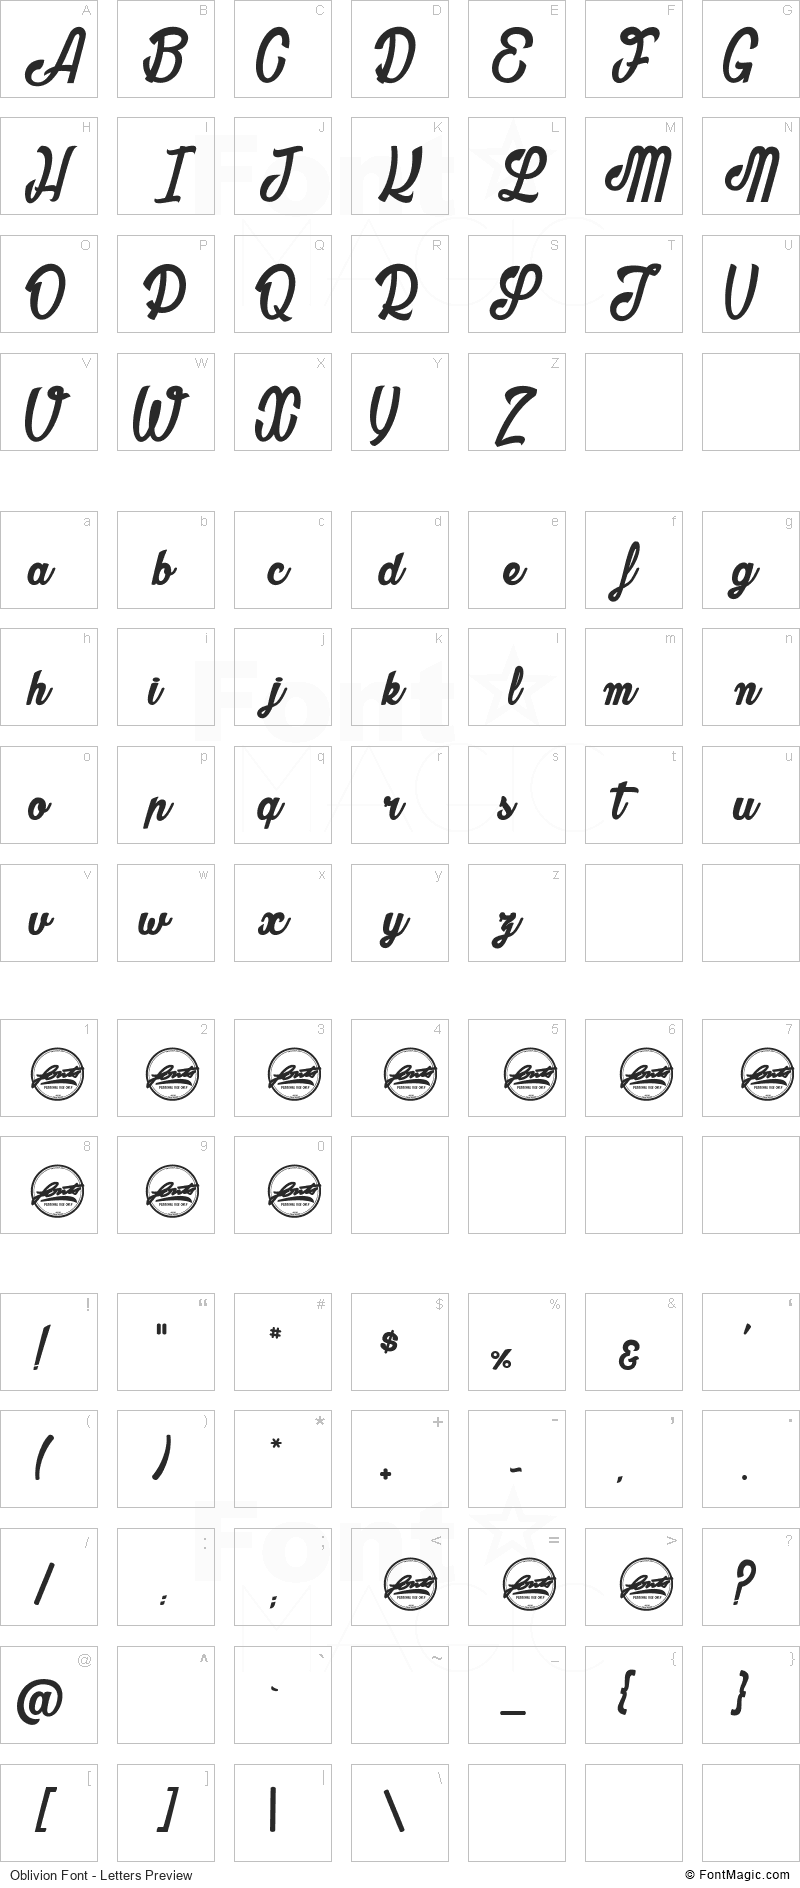 Oblivion Font - All Latters Preview Chart